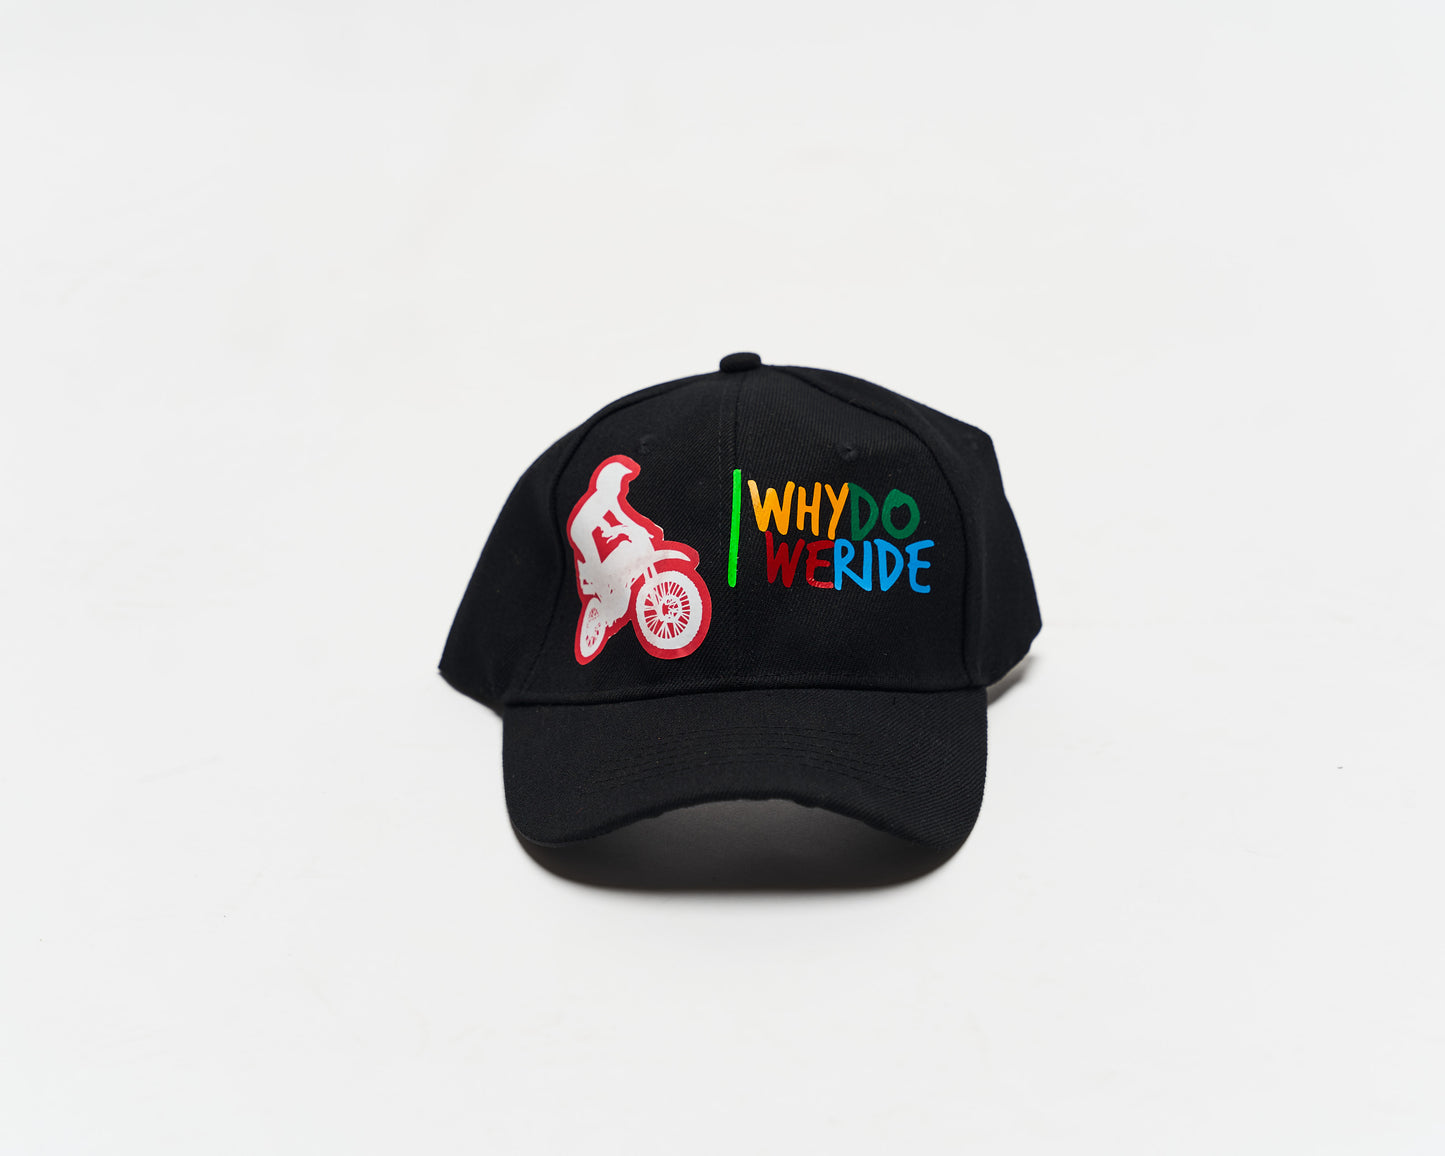 B-360 "Why We Ride" Hat